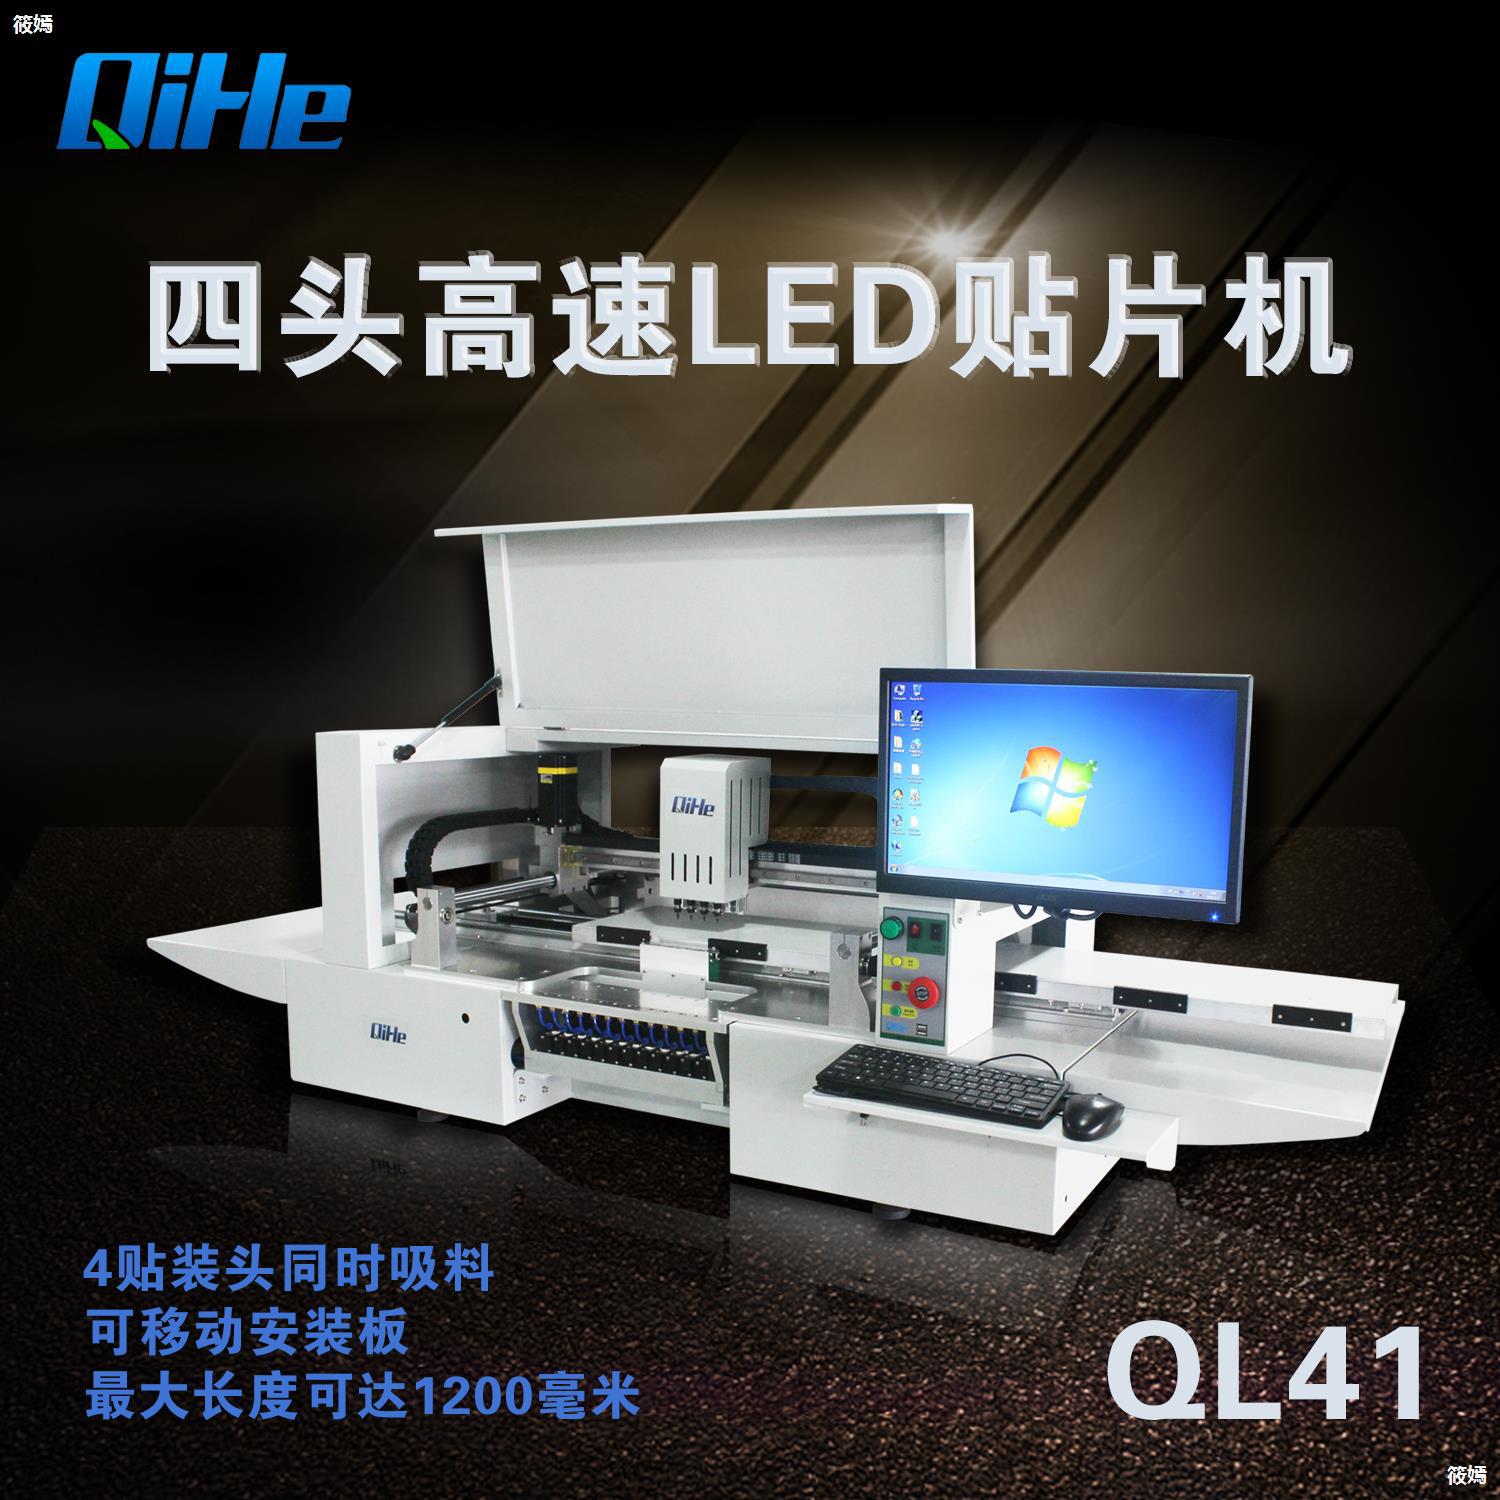 Manufactor QL41 SMT suit small-scale Mounter domestic Mounter High speed vision LED Mounter